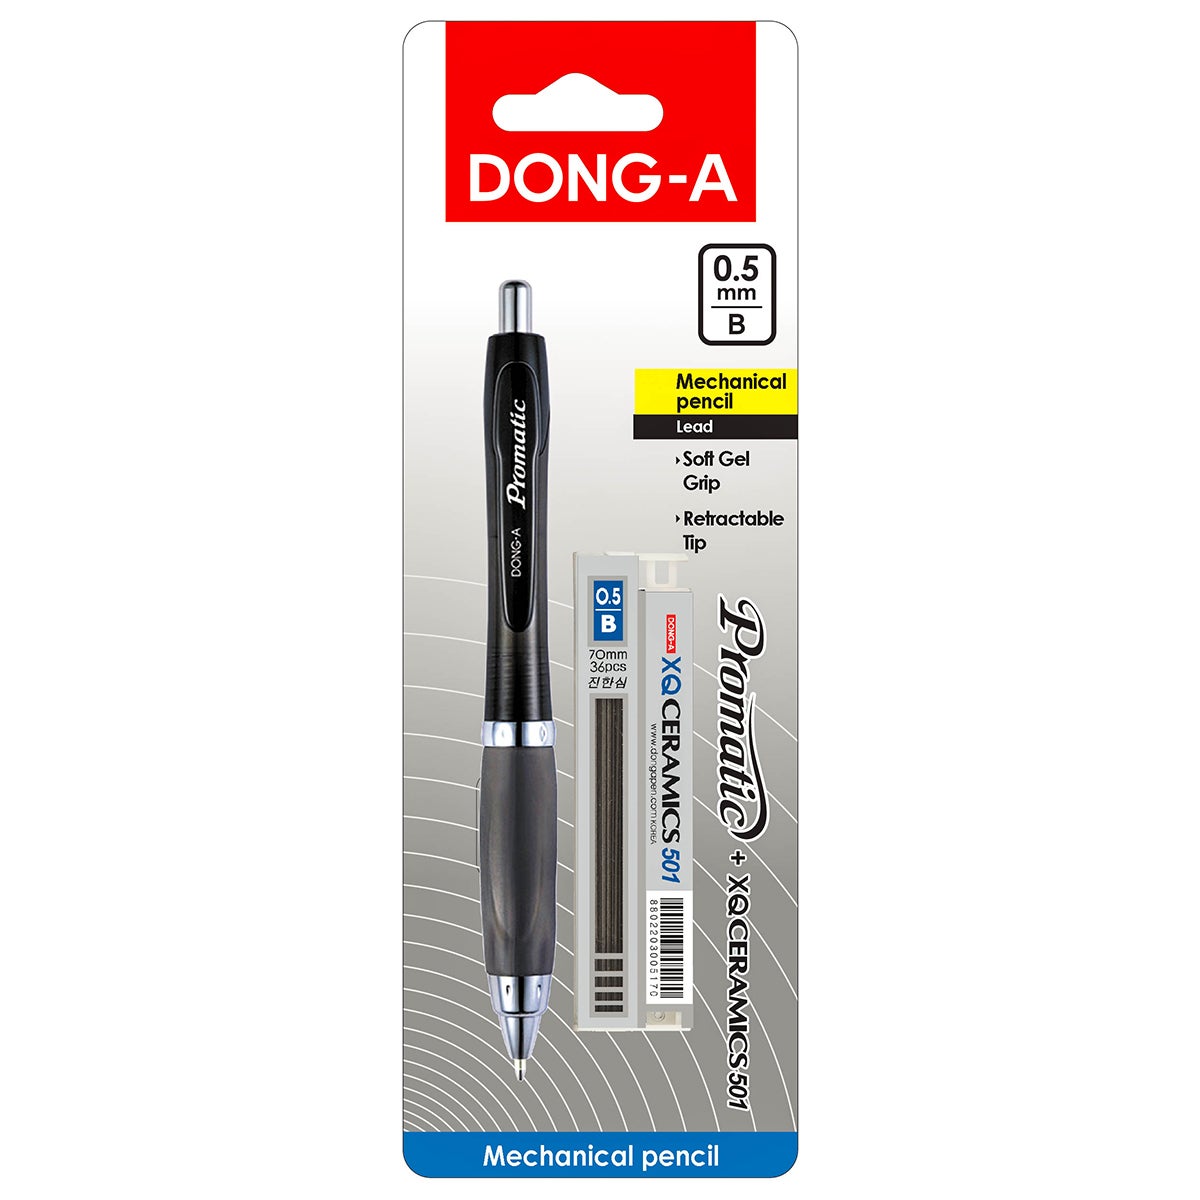 DONG-A Promatic Mechanical Pencil - Black product image 1